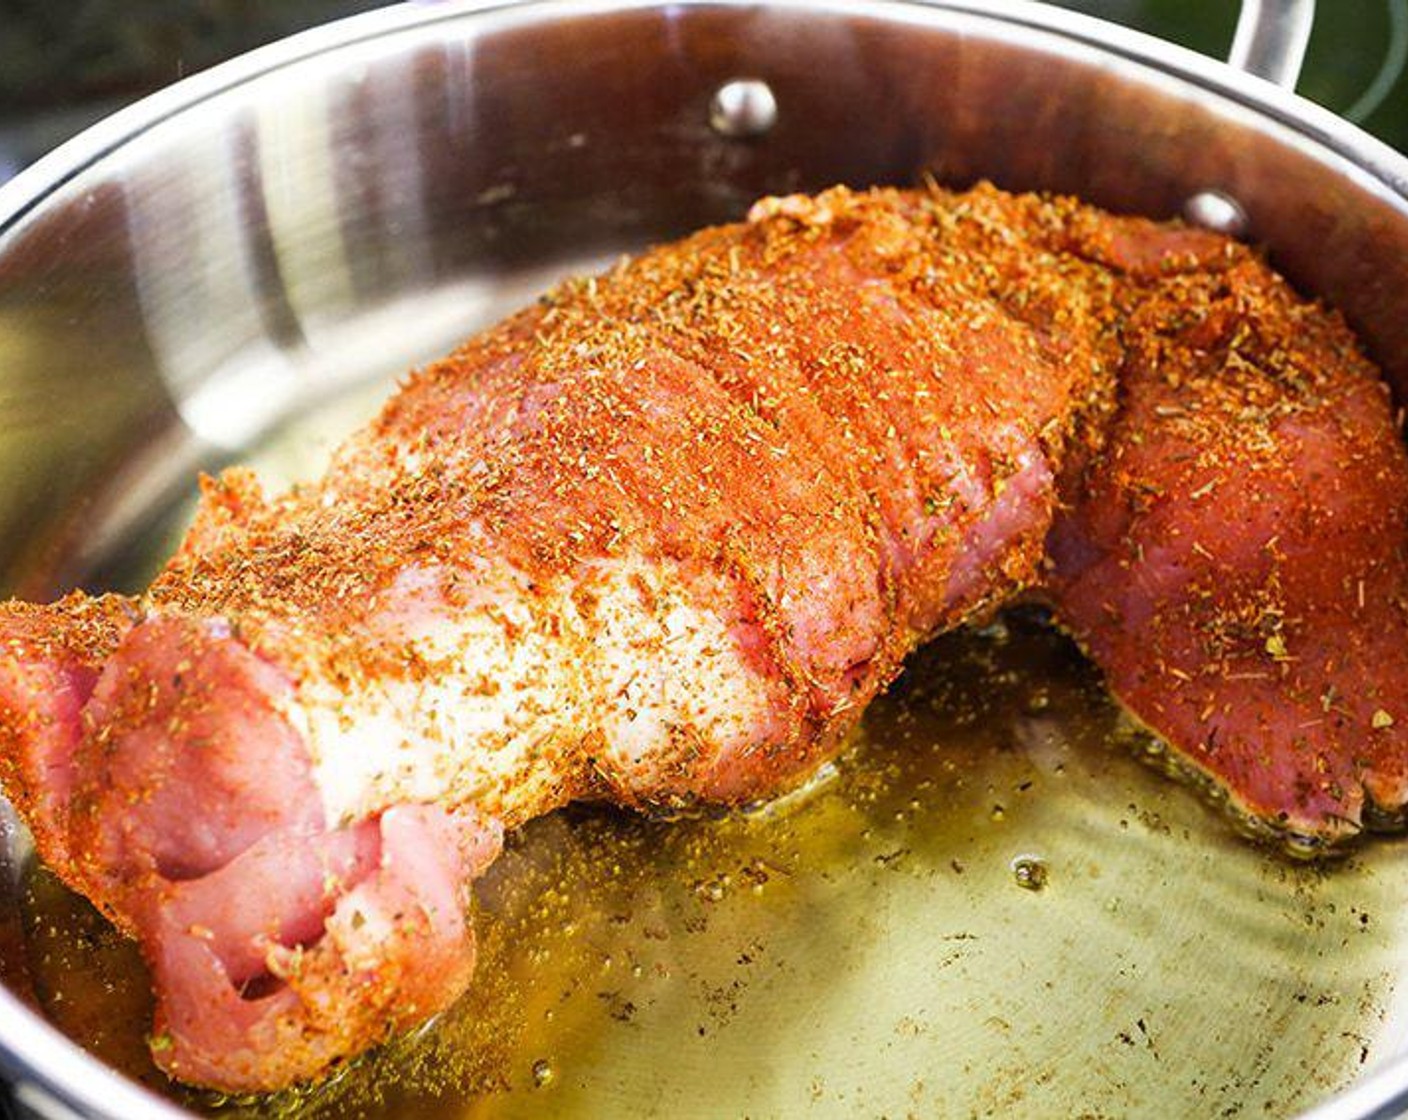 step 5 Heat the Olive Oil (3 Tbsp) in a skillet over medium heat and add the pork loin.